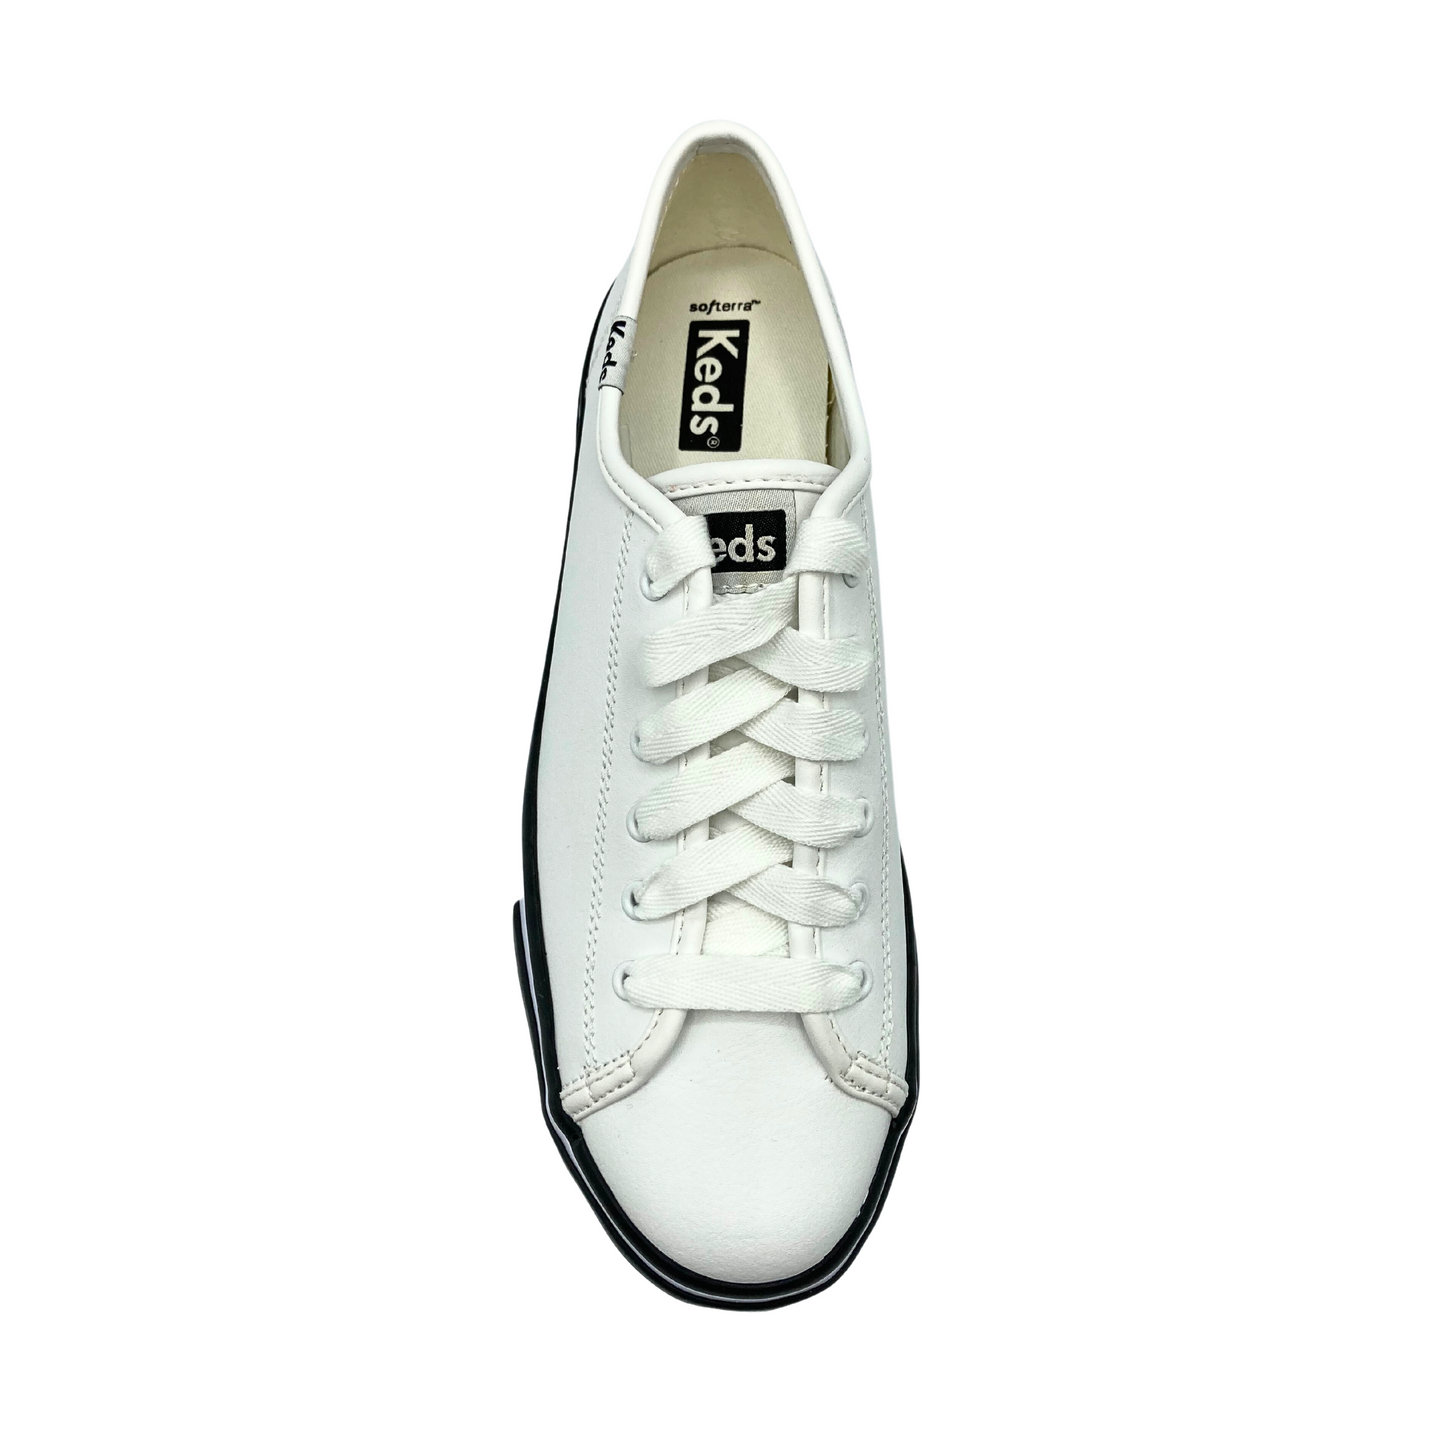 Top down view of a white leather sneaker with white laces.  